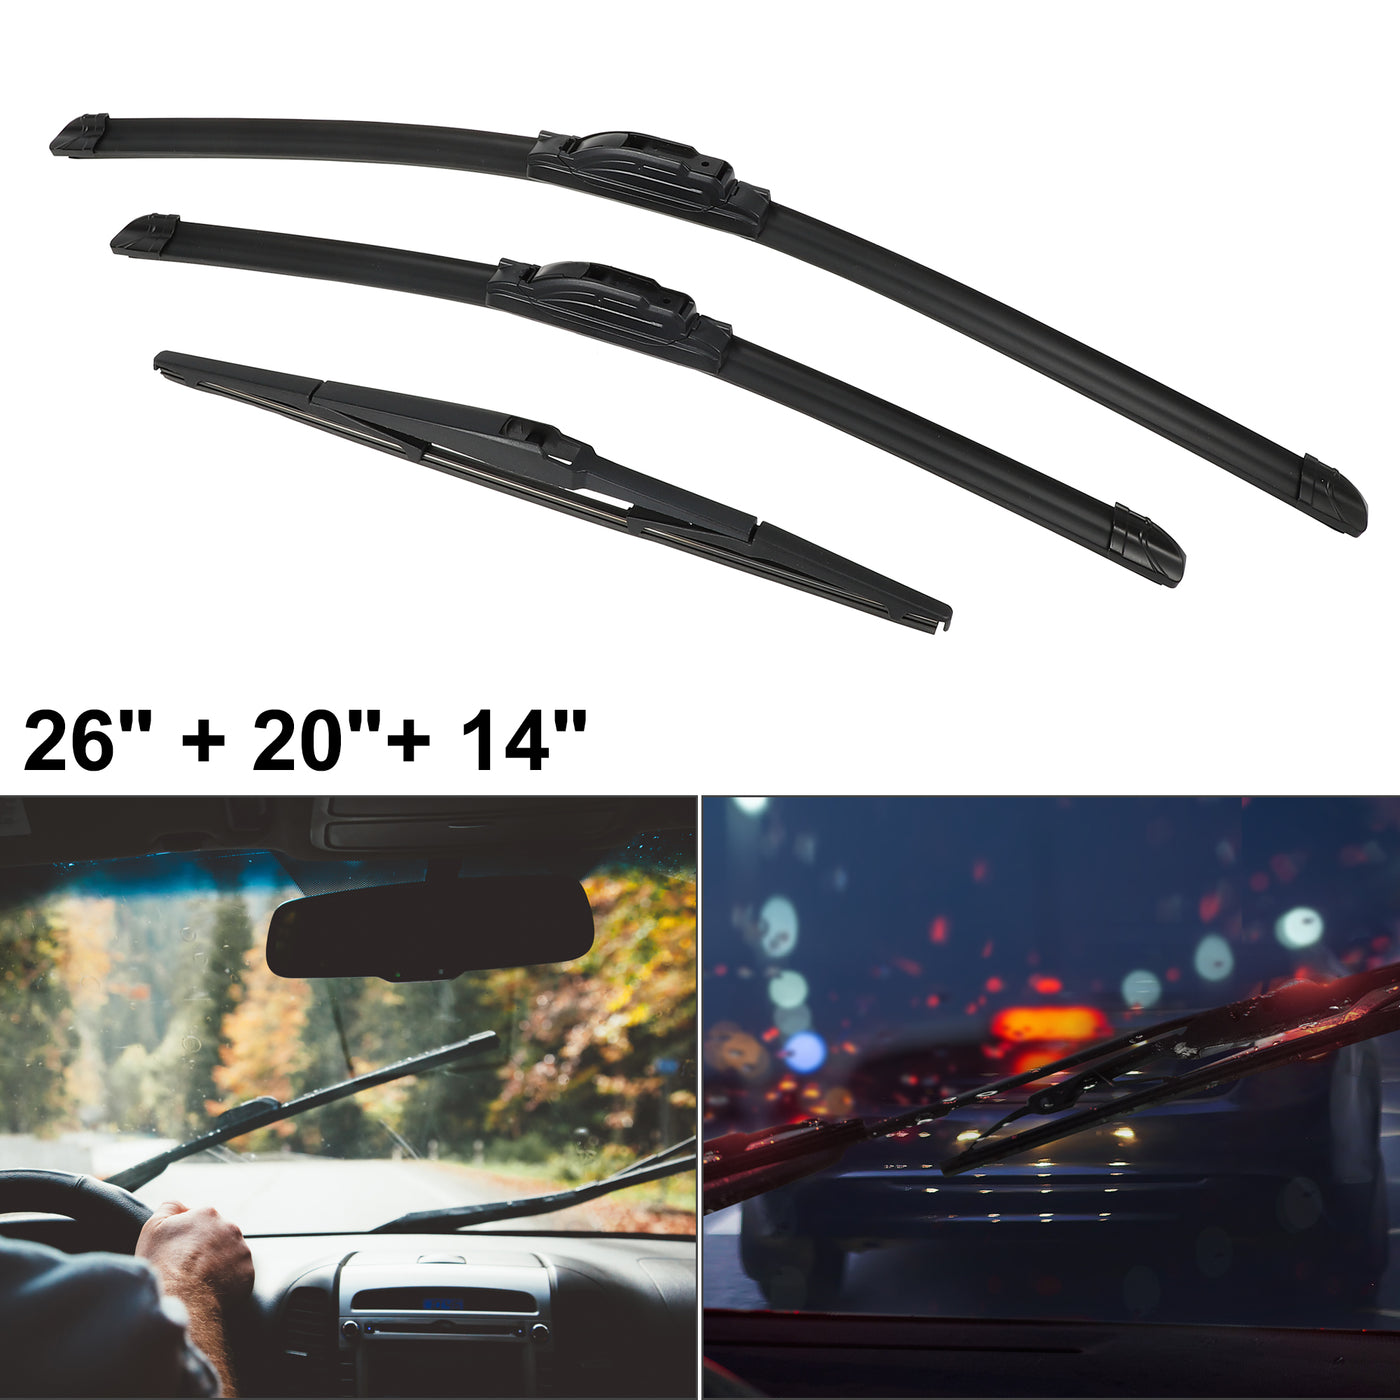 ACROPIX Front Rear Windshield Wiper Blade Set Fit for Chrysler Pacifica 2017-2021 - Pack of 3 Black